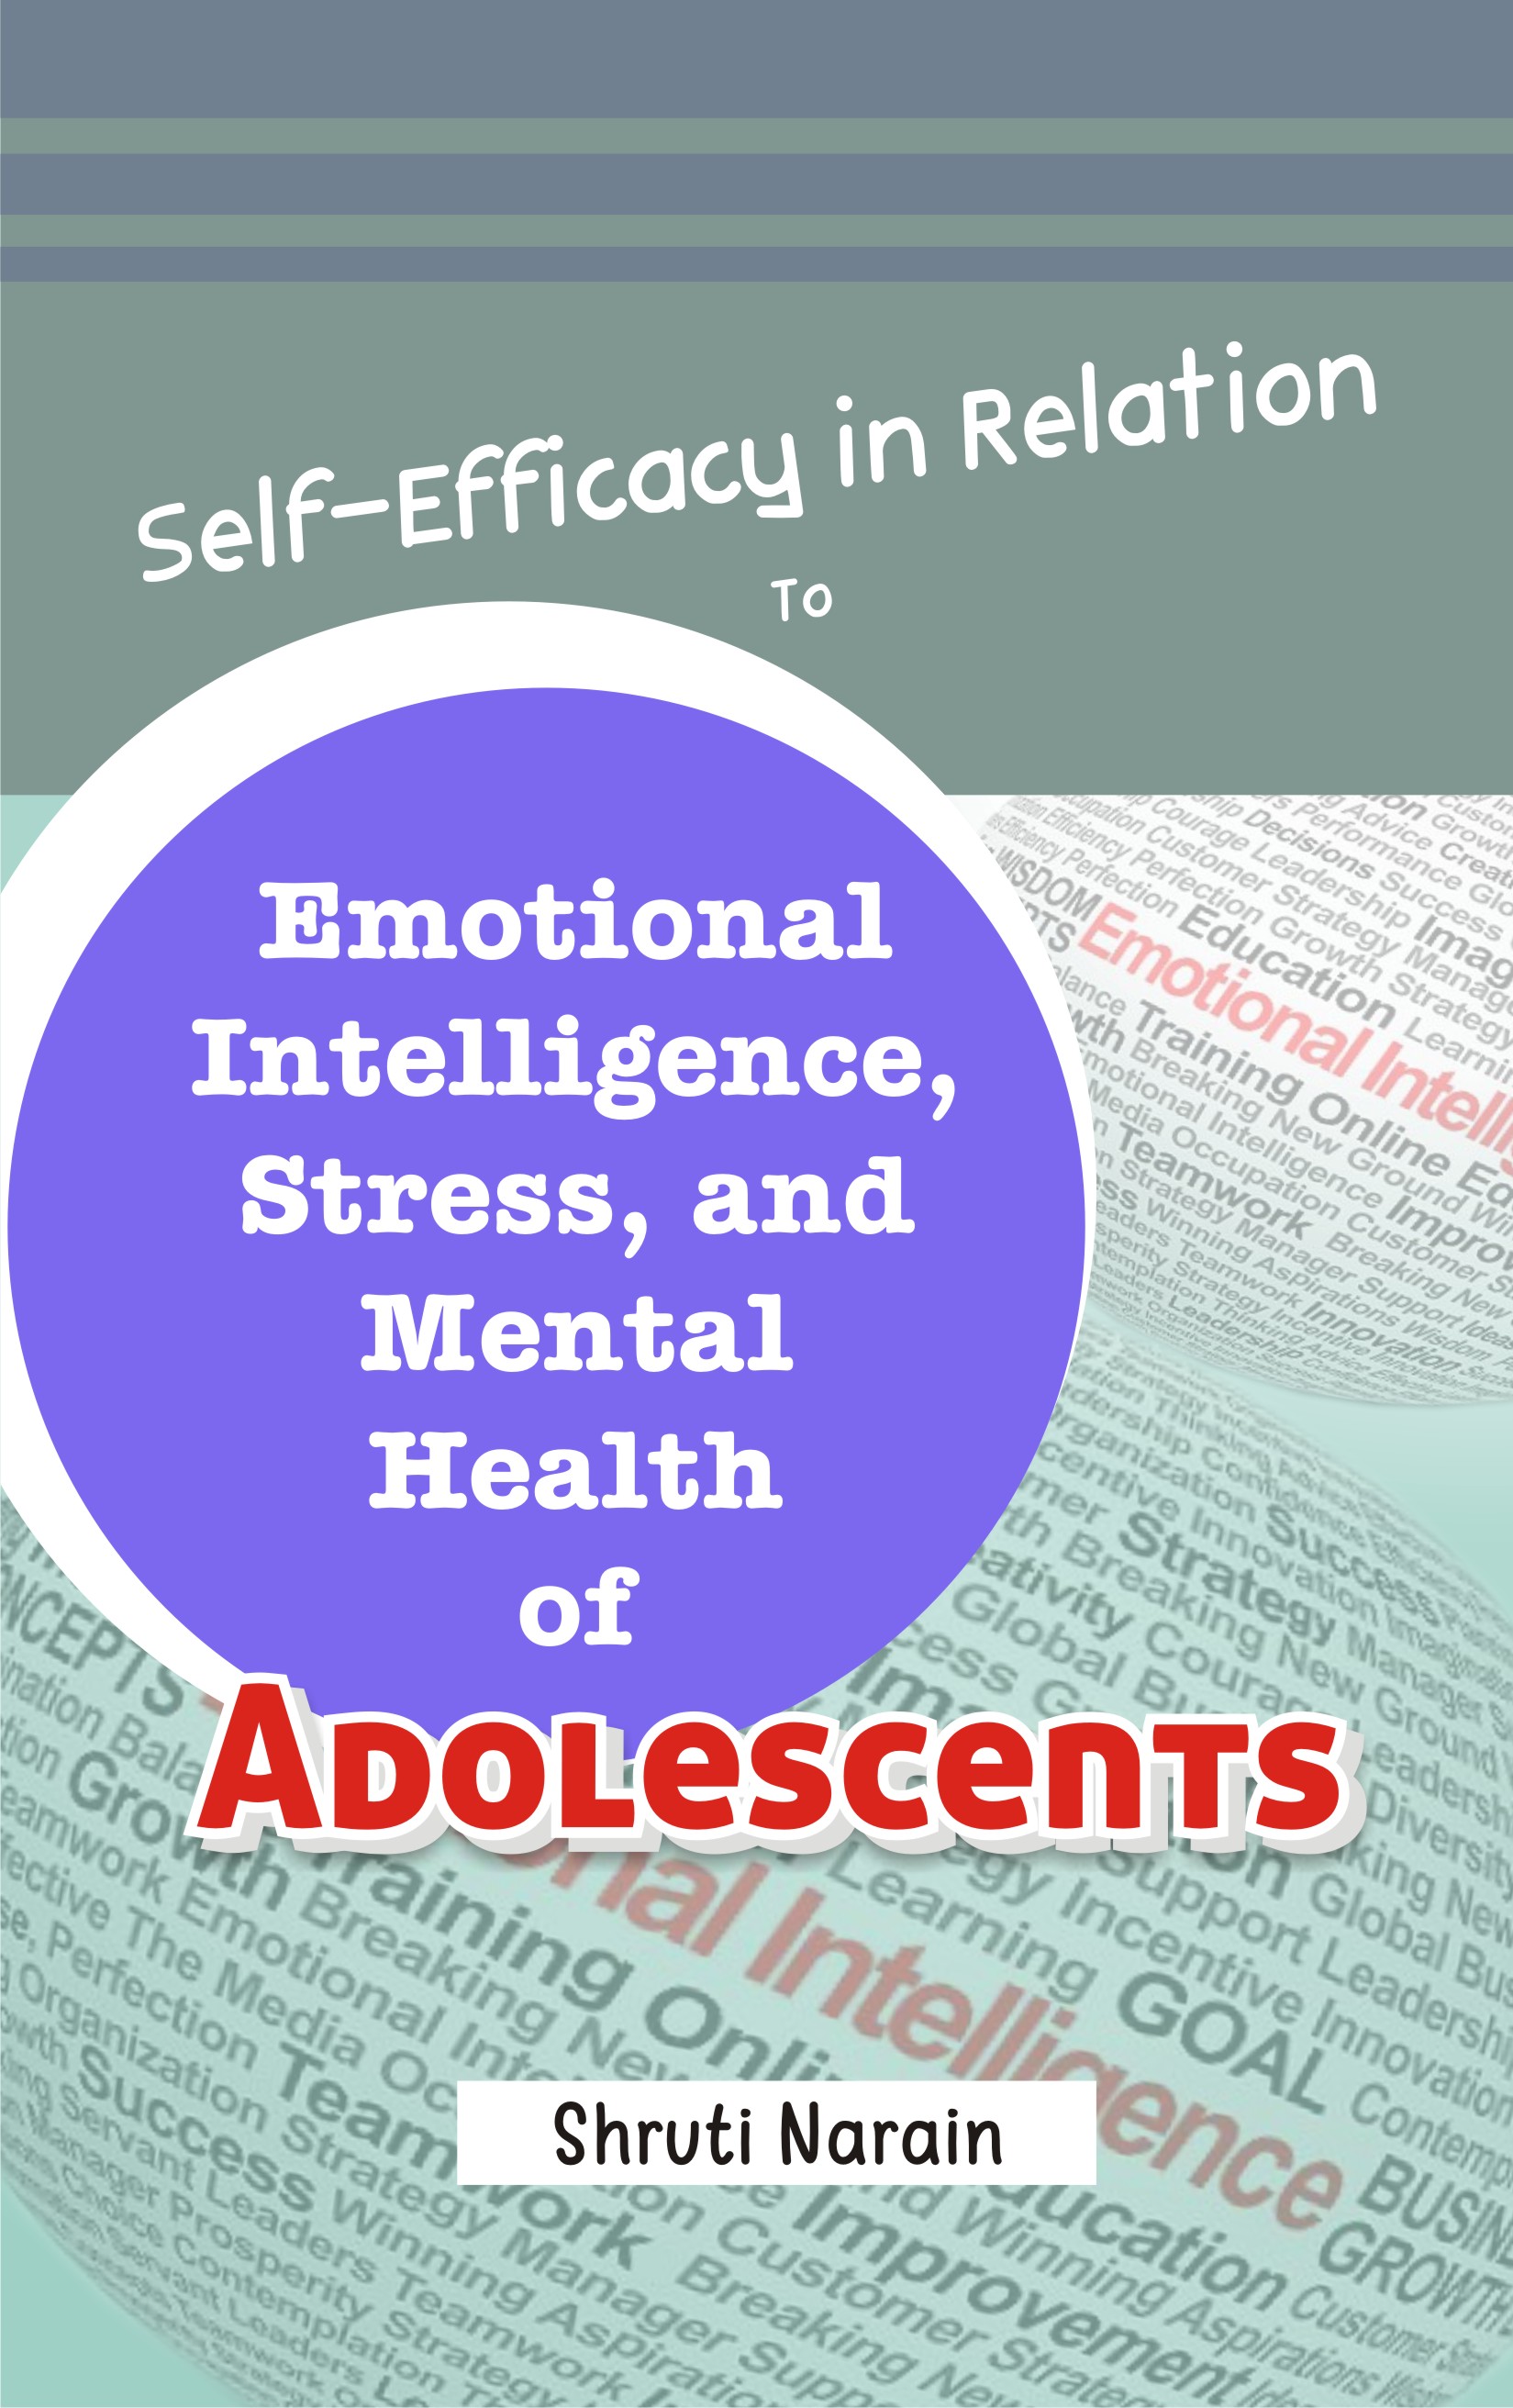 SELF-EFFICACY-IN-RELATION-TO-EMOTIONAL-INTELLIGENCE,-STRESS-AND-MENTAL-HEALTH-OF-ADOLESCENTS